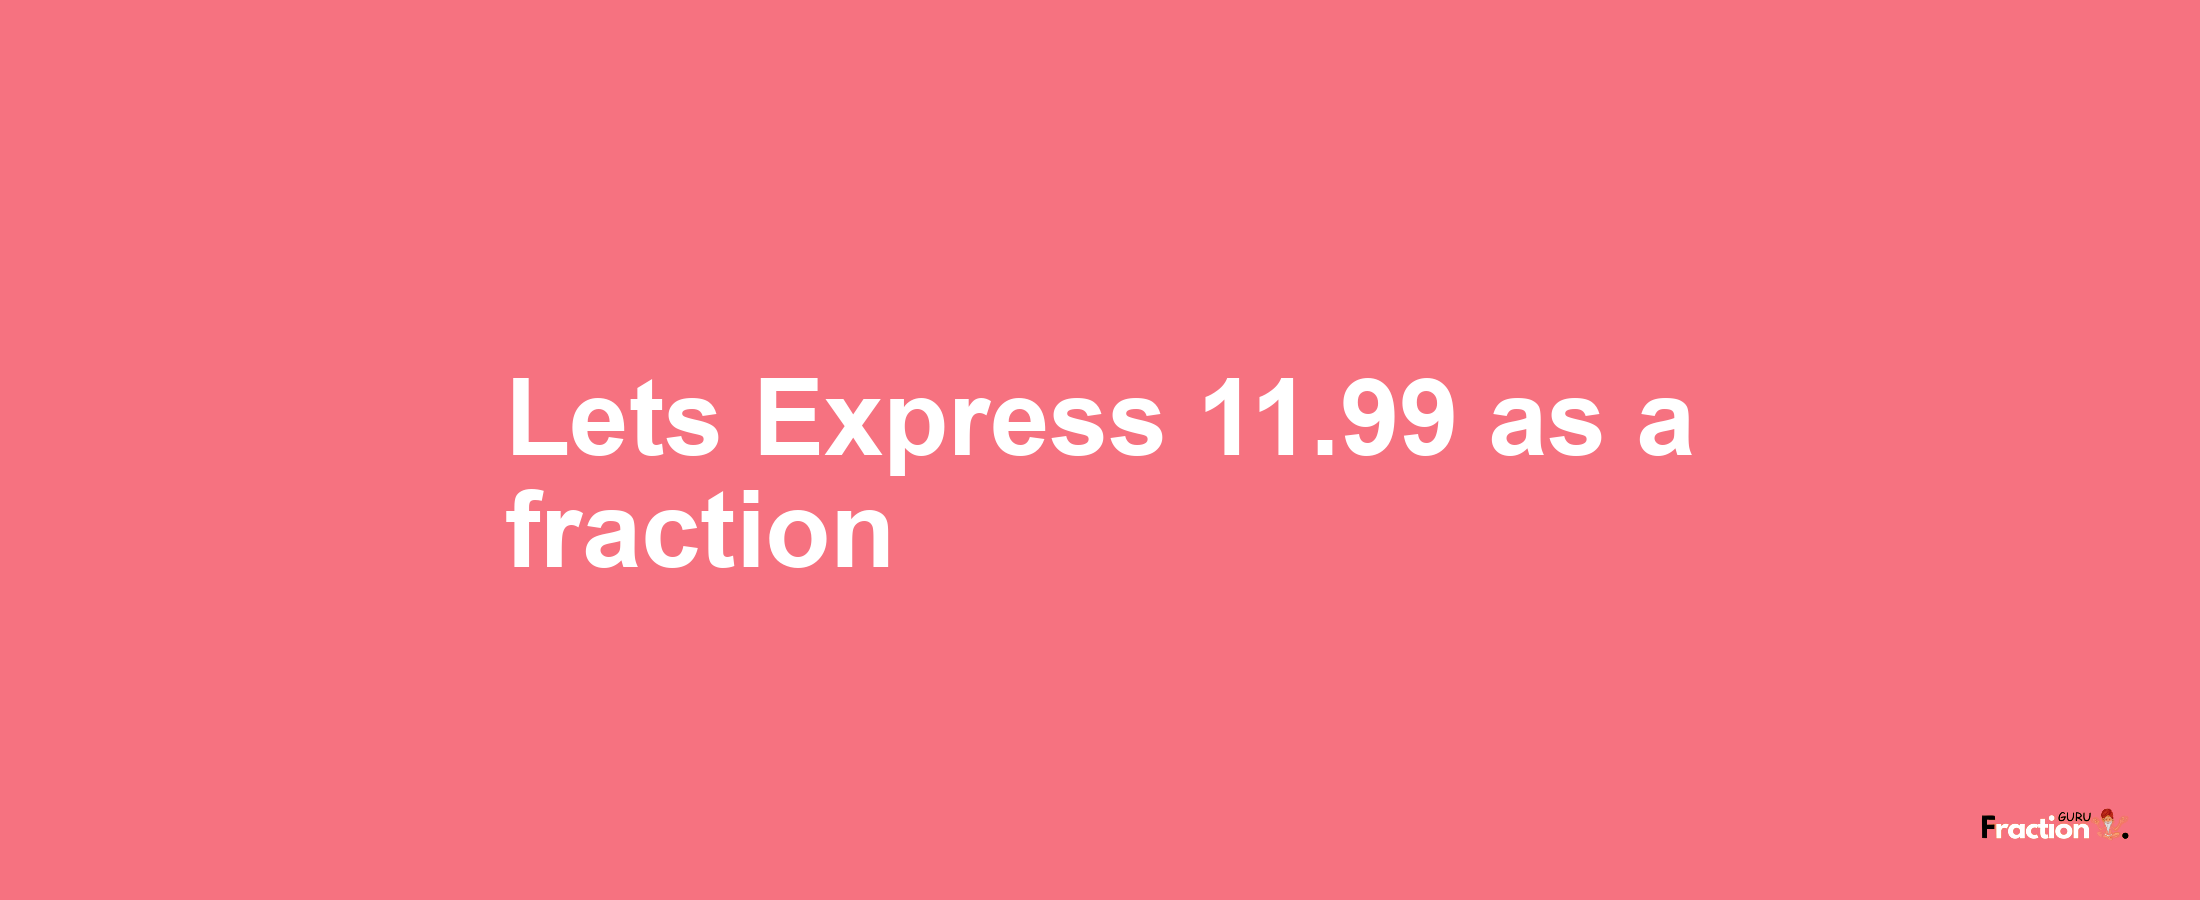 Lets Express 11.99 as afraction